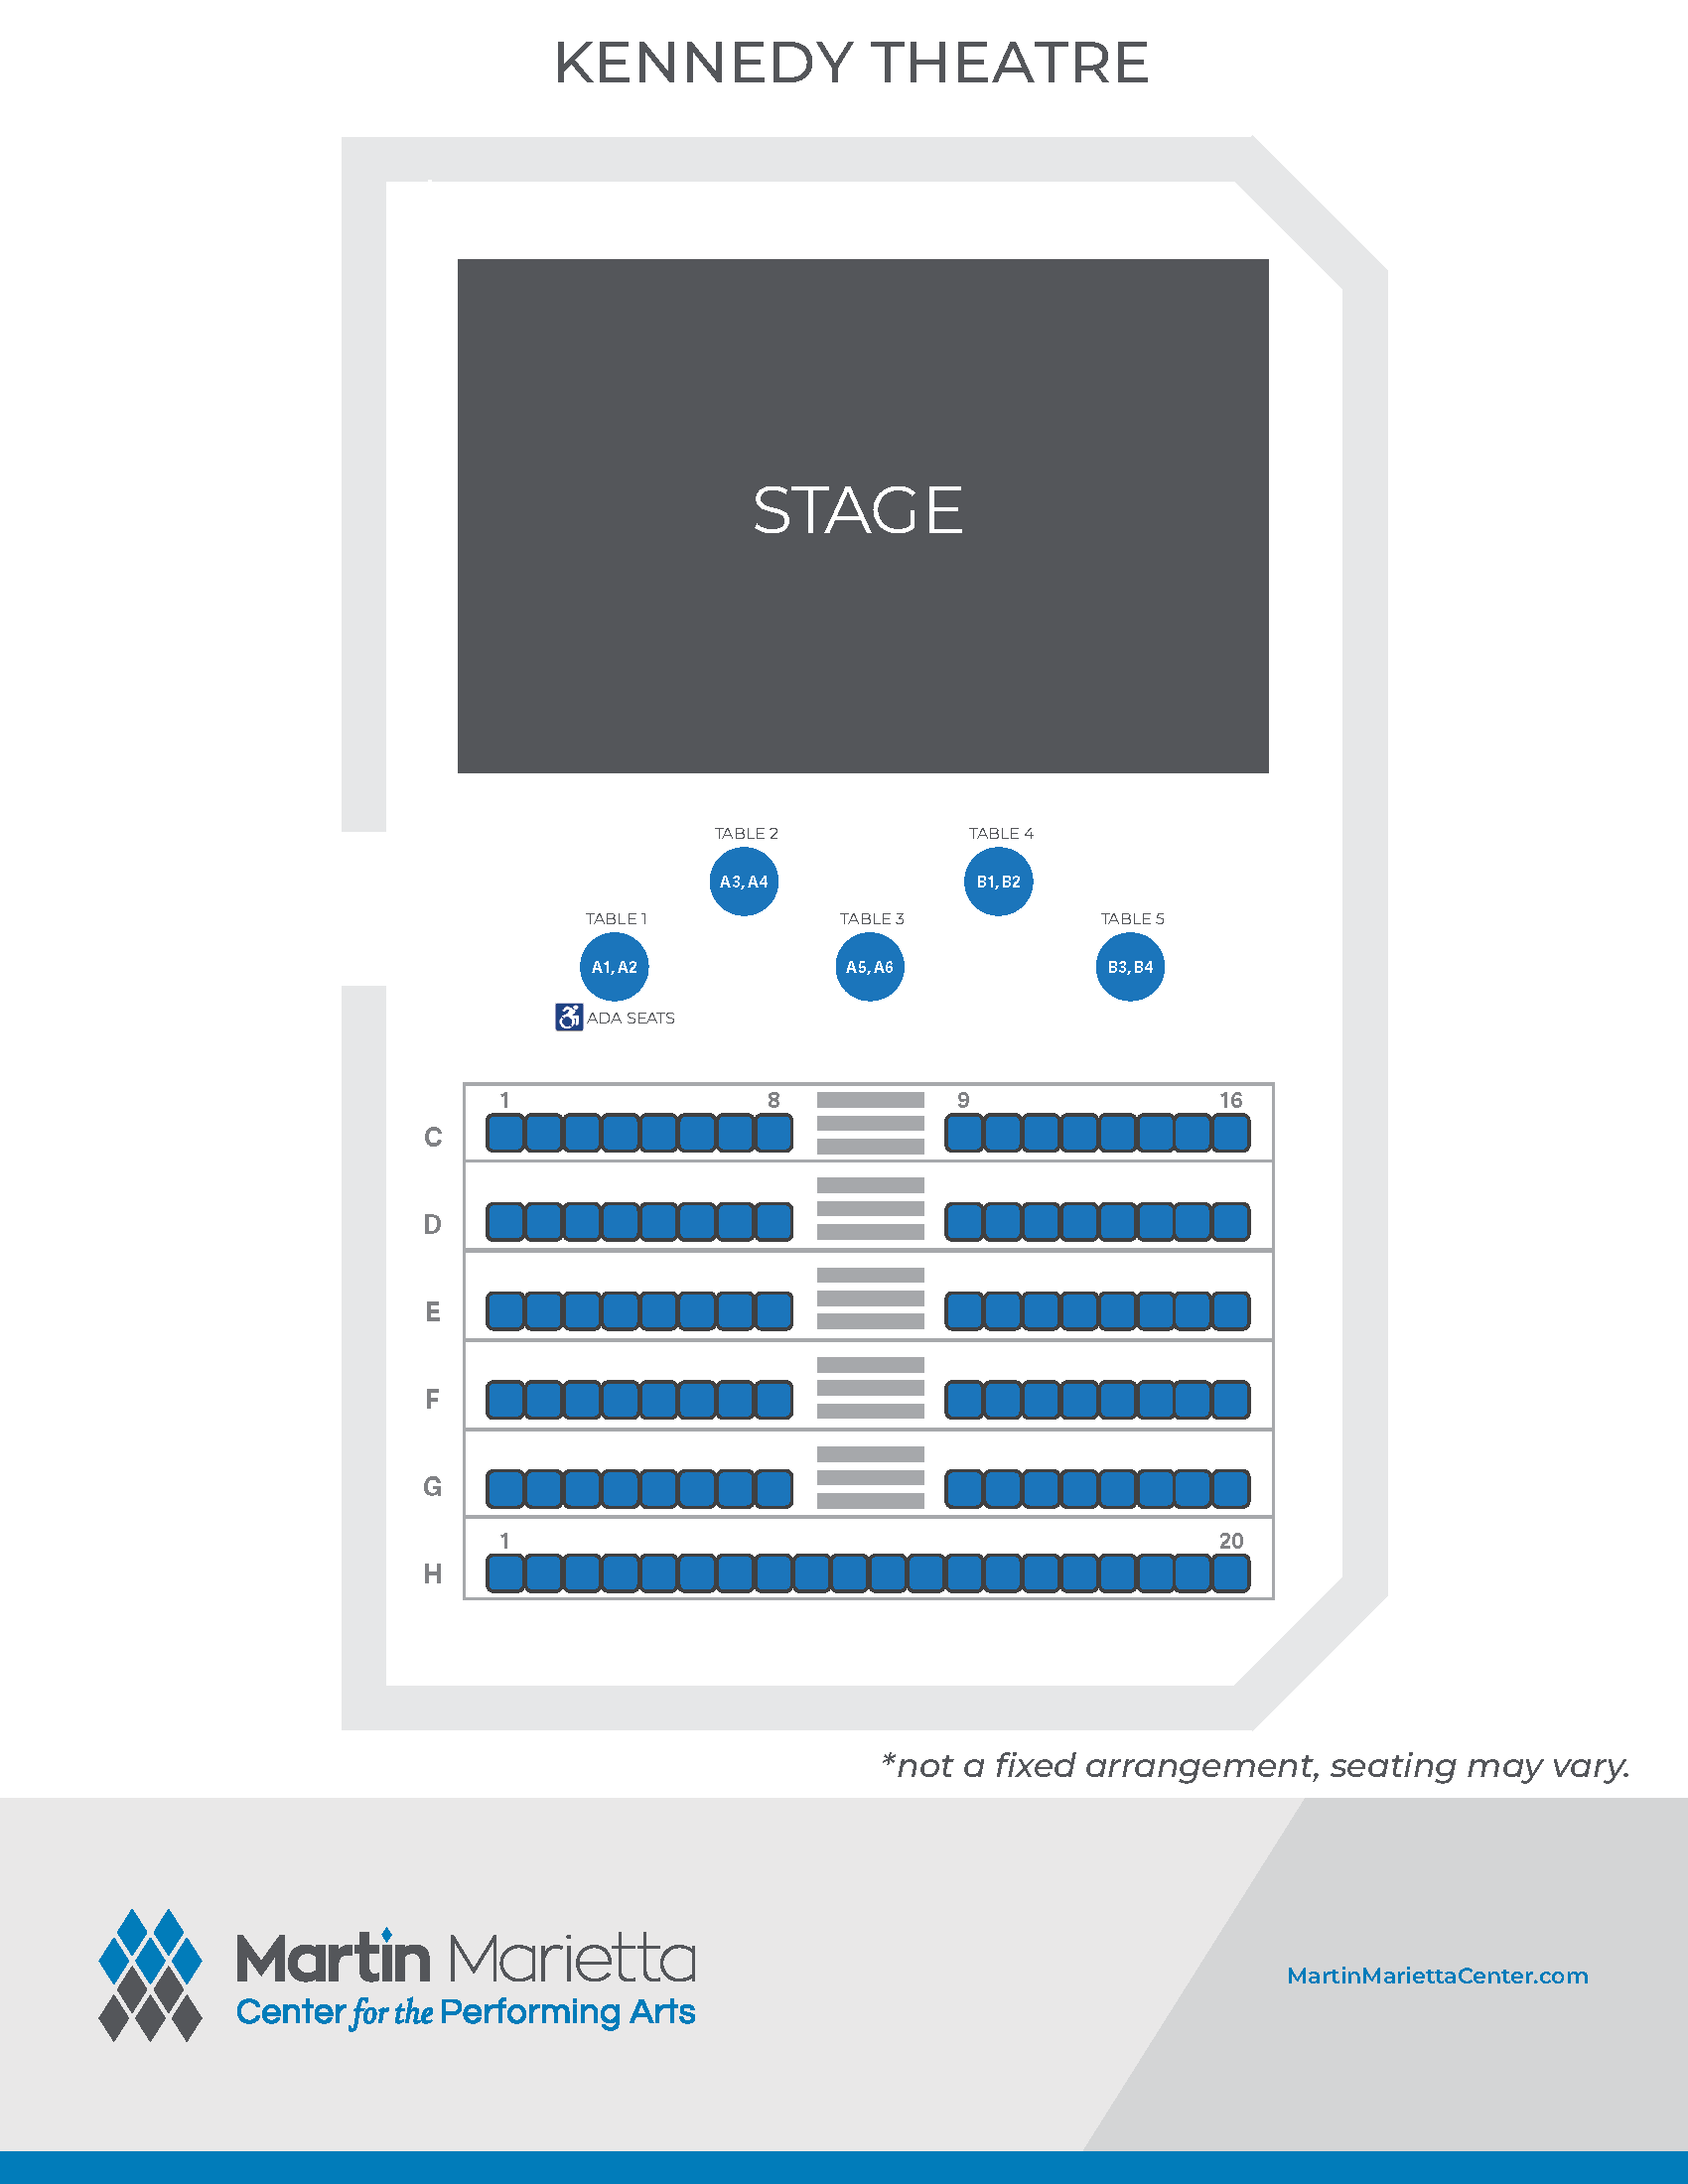 Kennedy Theatre seating chart